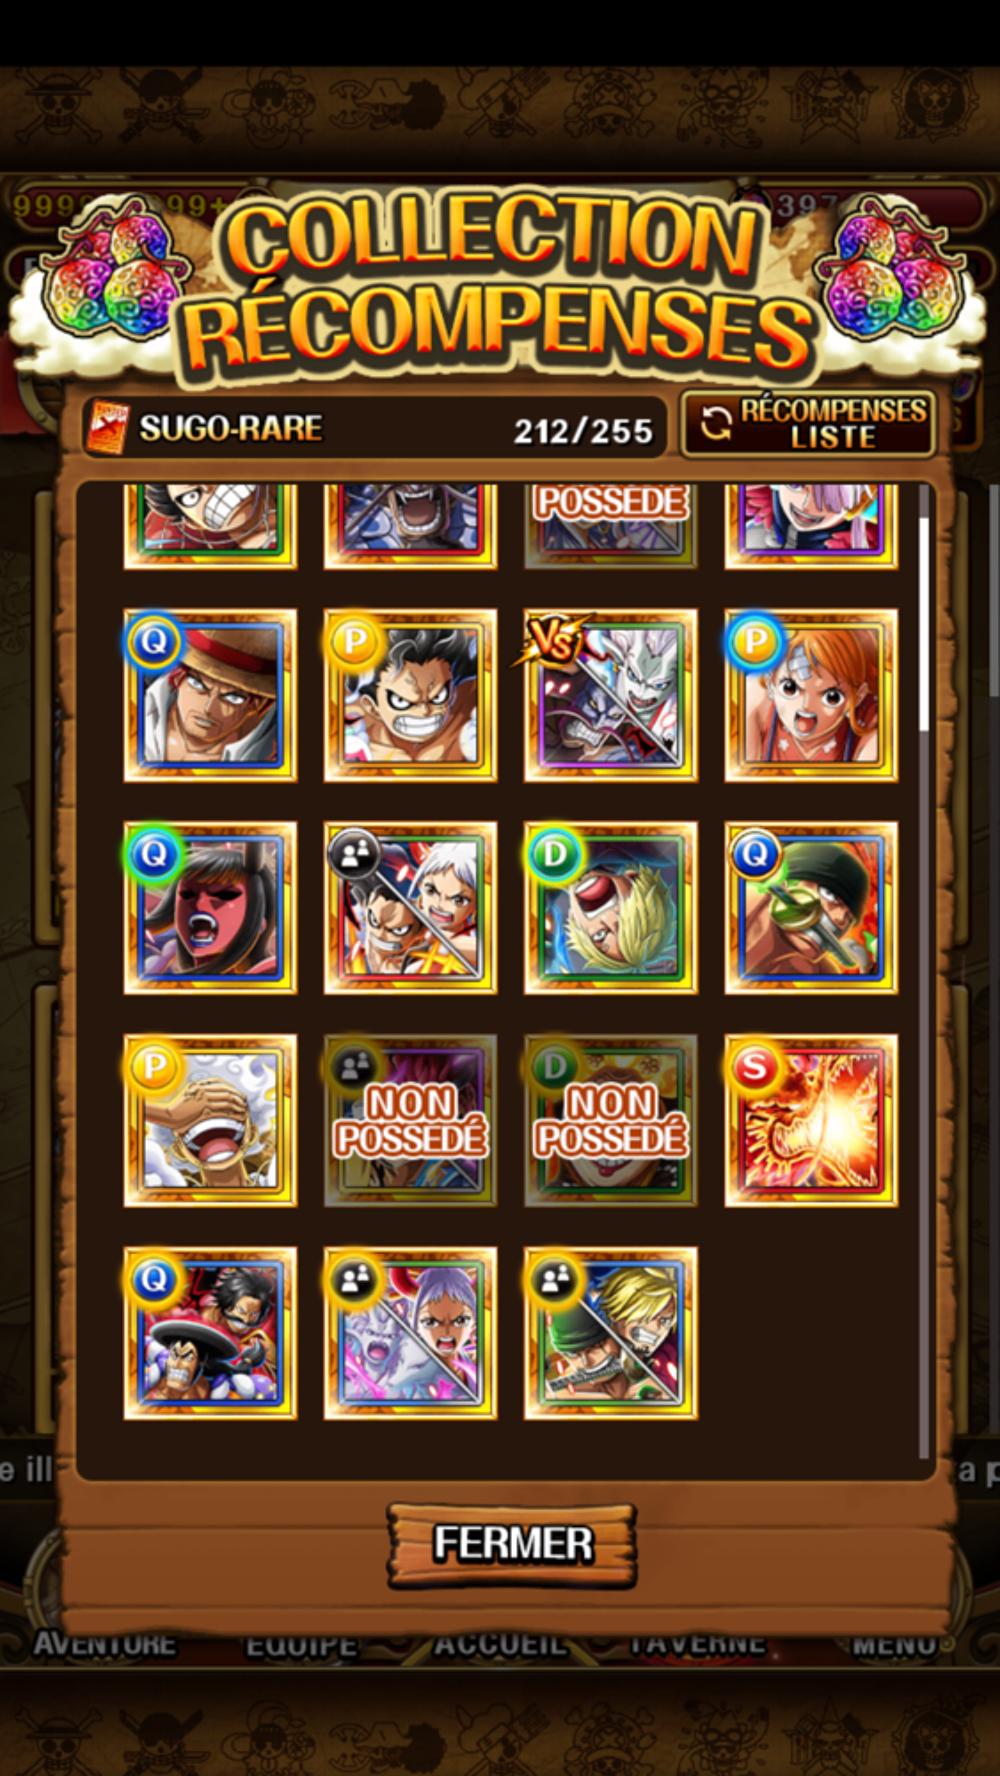 Compte End Game OPTC One Piece Treasure Cruise Consoles et jeux vidos